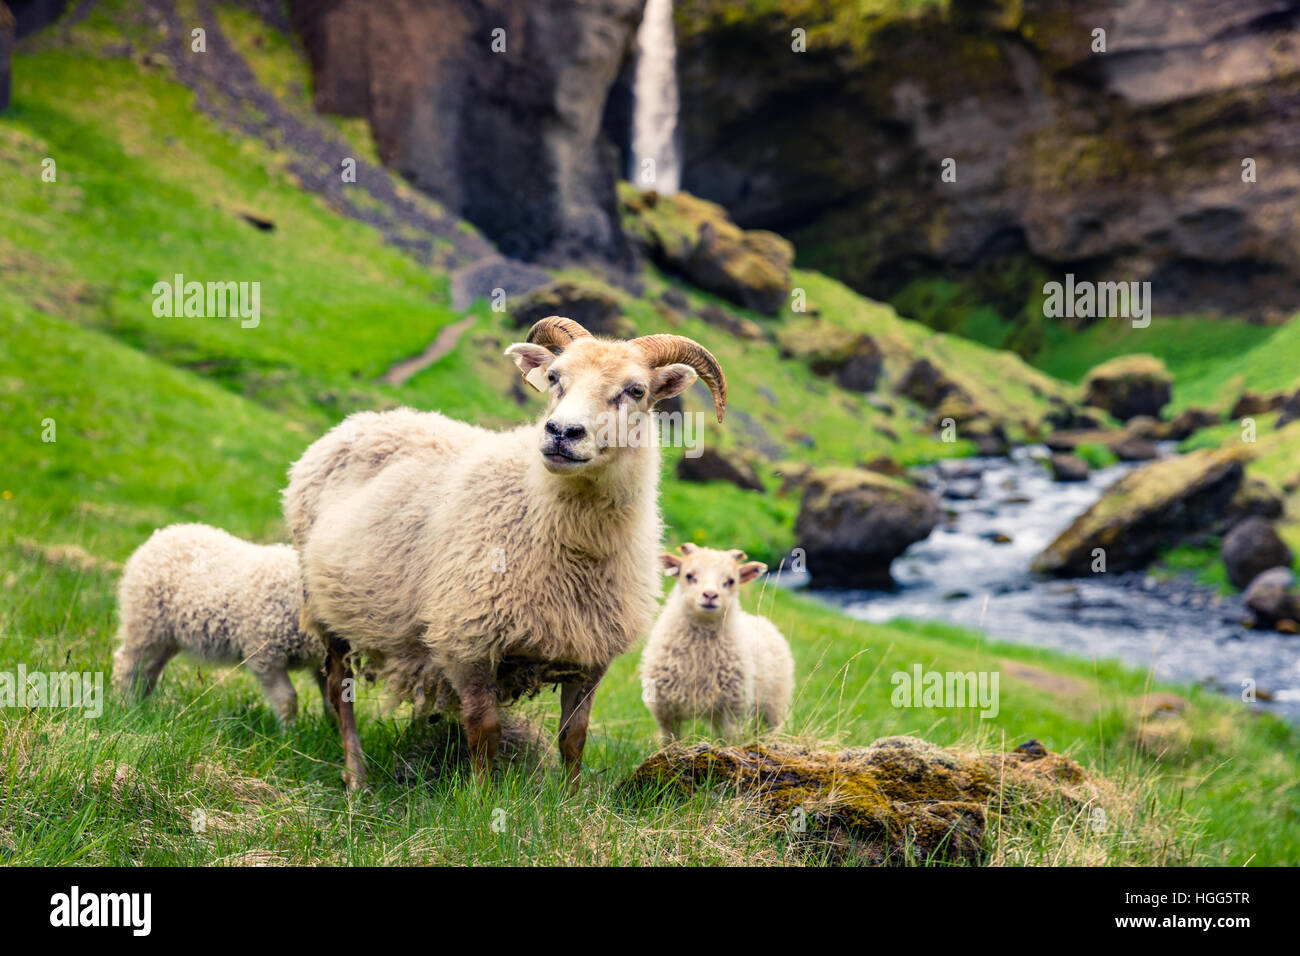 Goat with two babes on a green lawn. Colorful summer morning in Iceland, Europe. Stock Photo